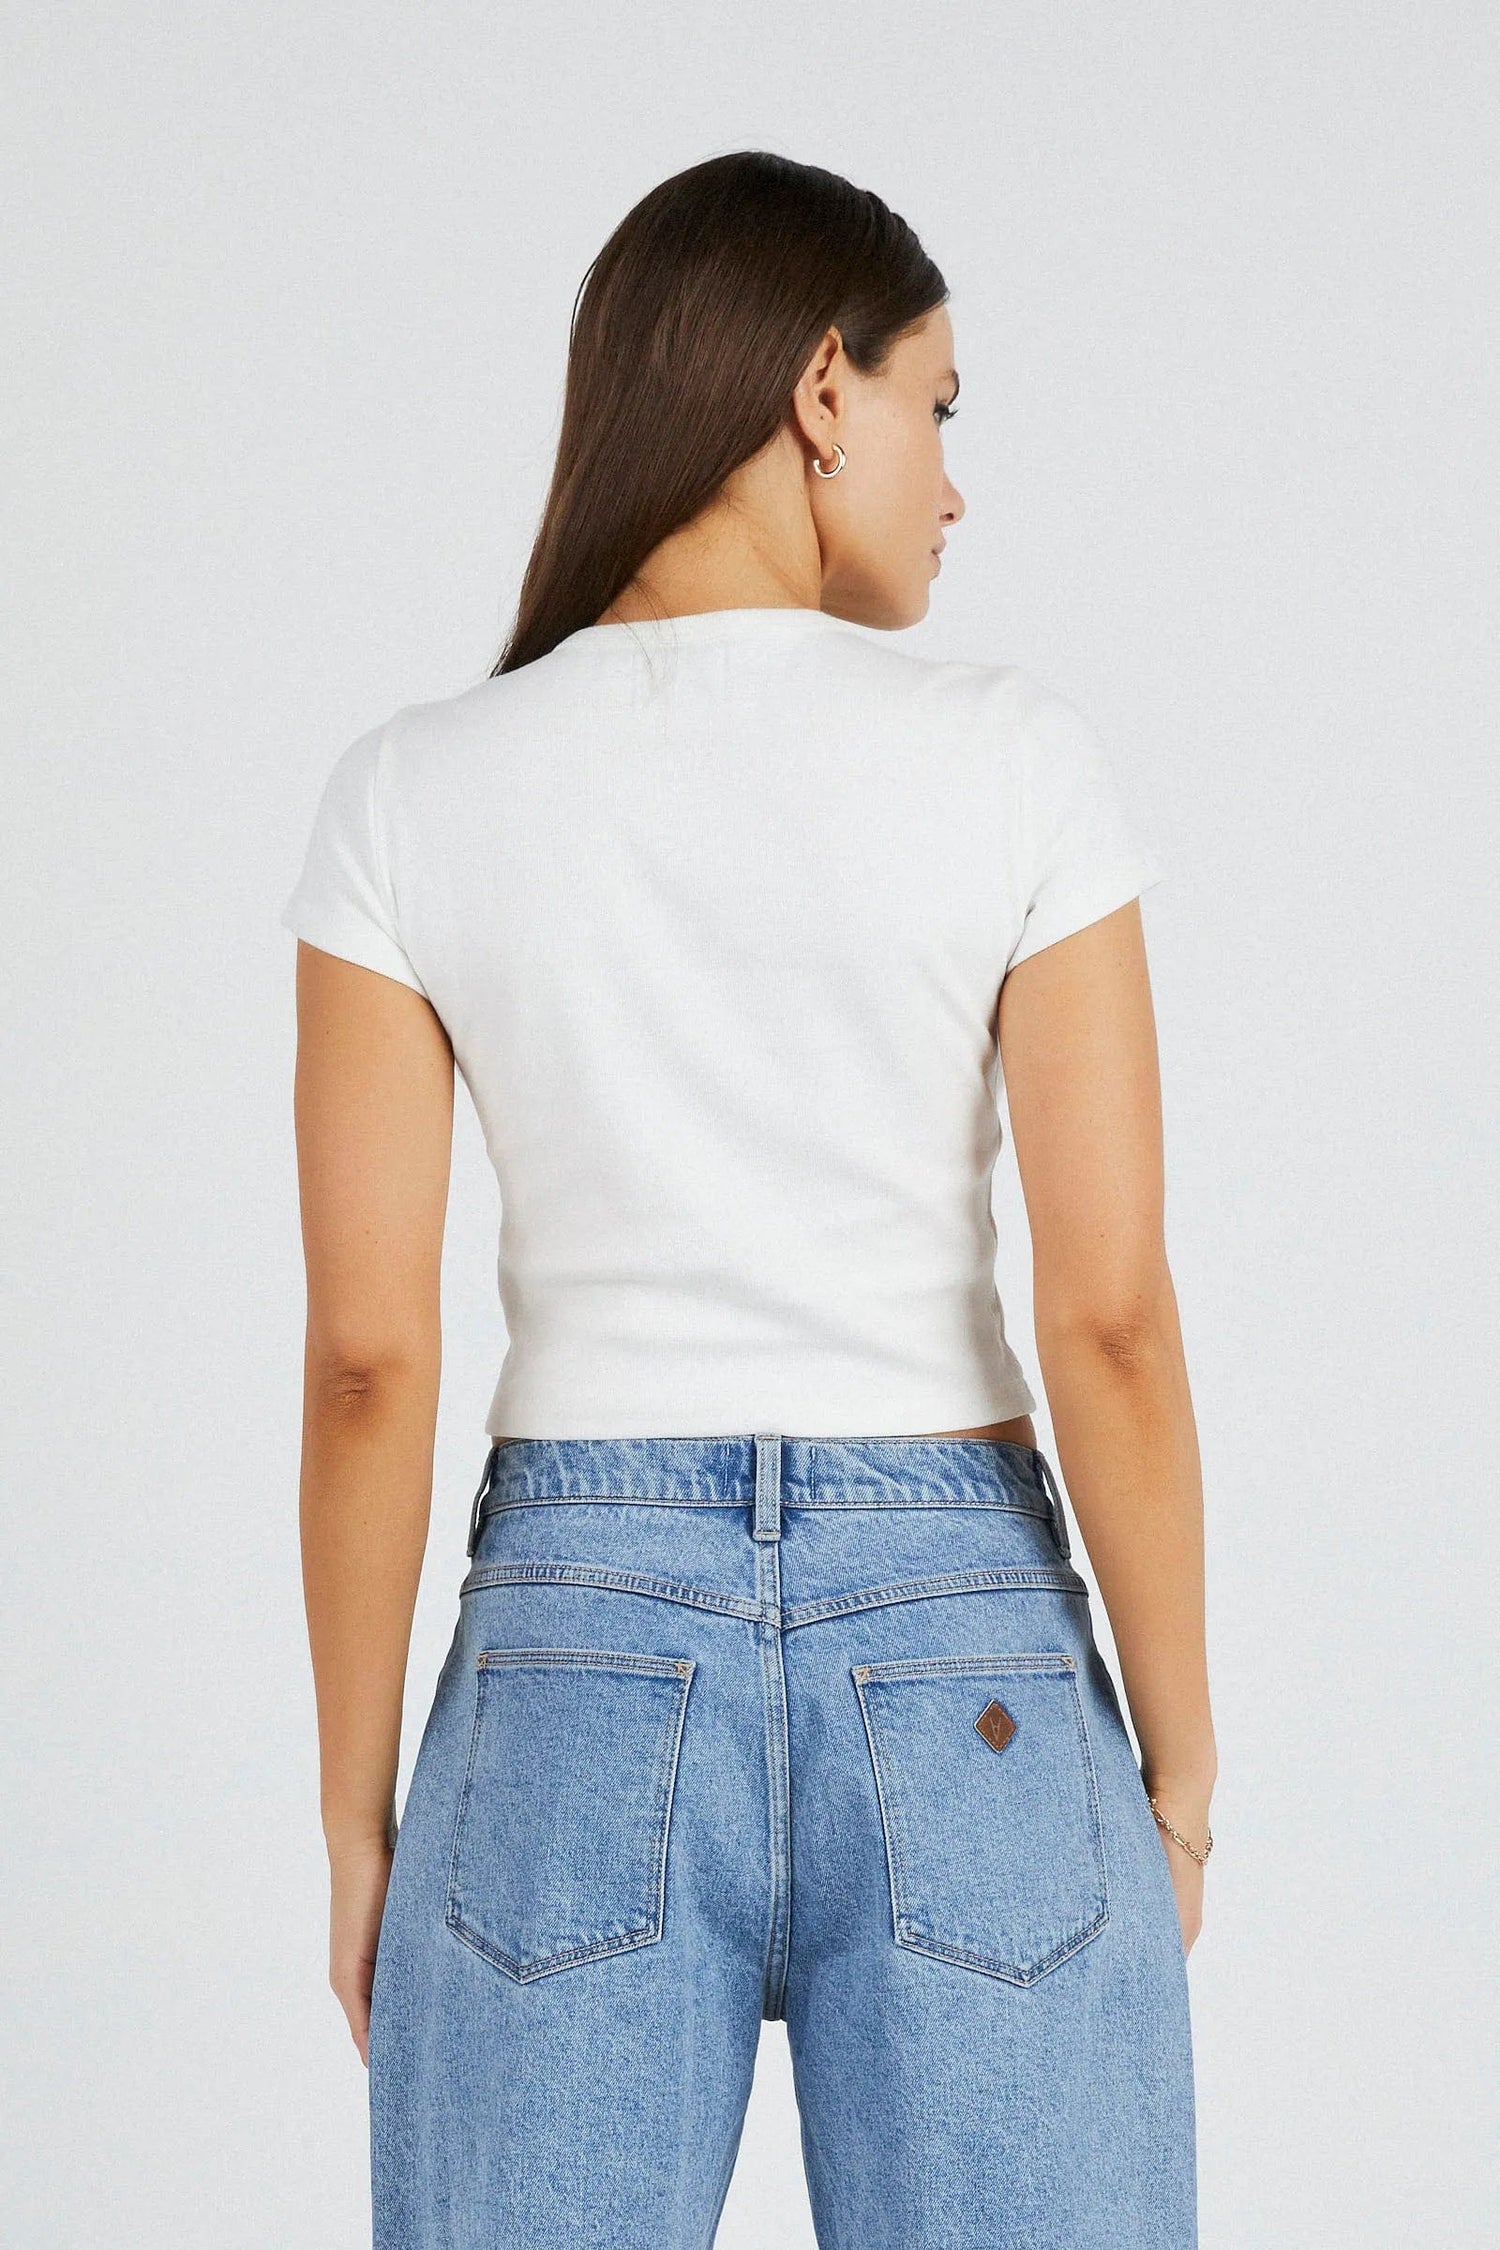 A Brand Jeans Top 90's Icon Baby Tee - White Sand